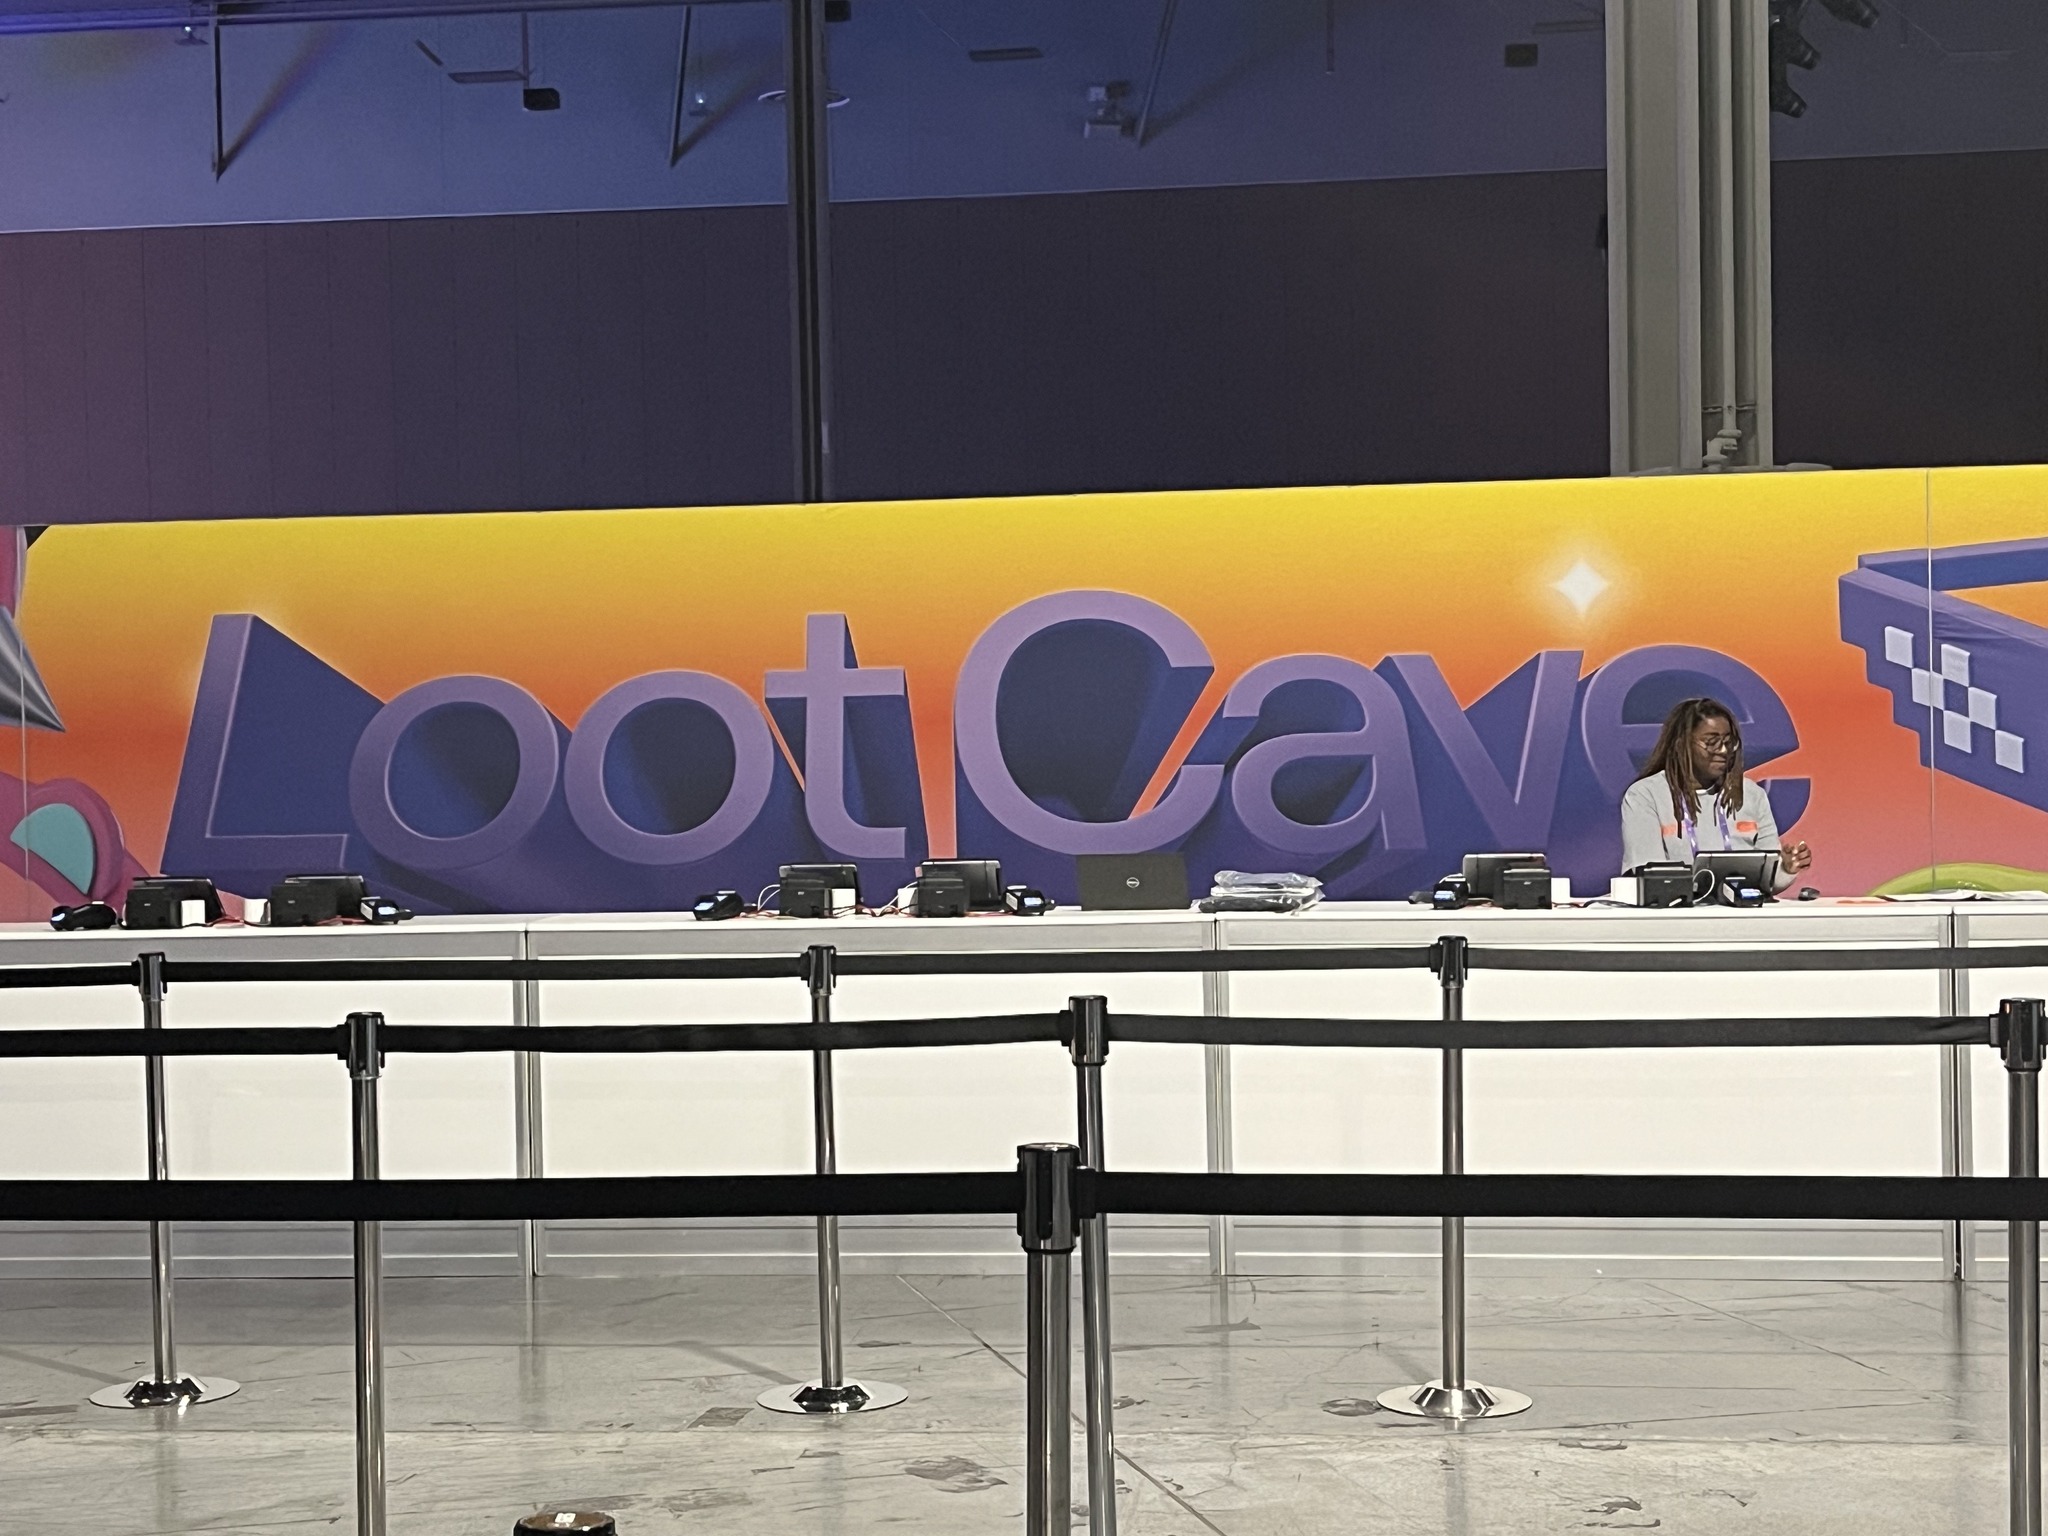 A woman staffs a registration desk labeled "loot cave" in a colorful, modern event hall.